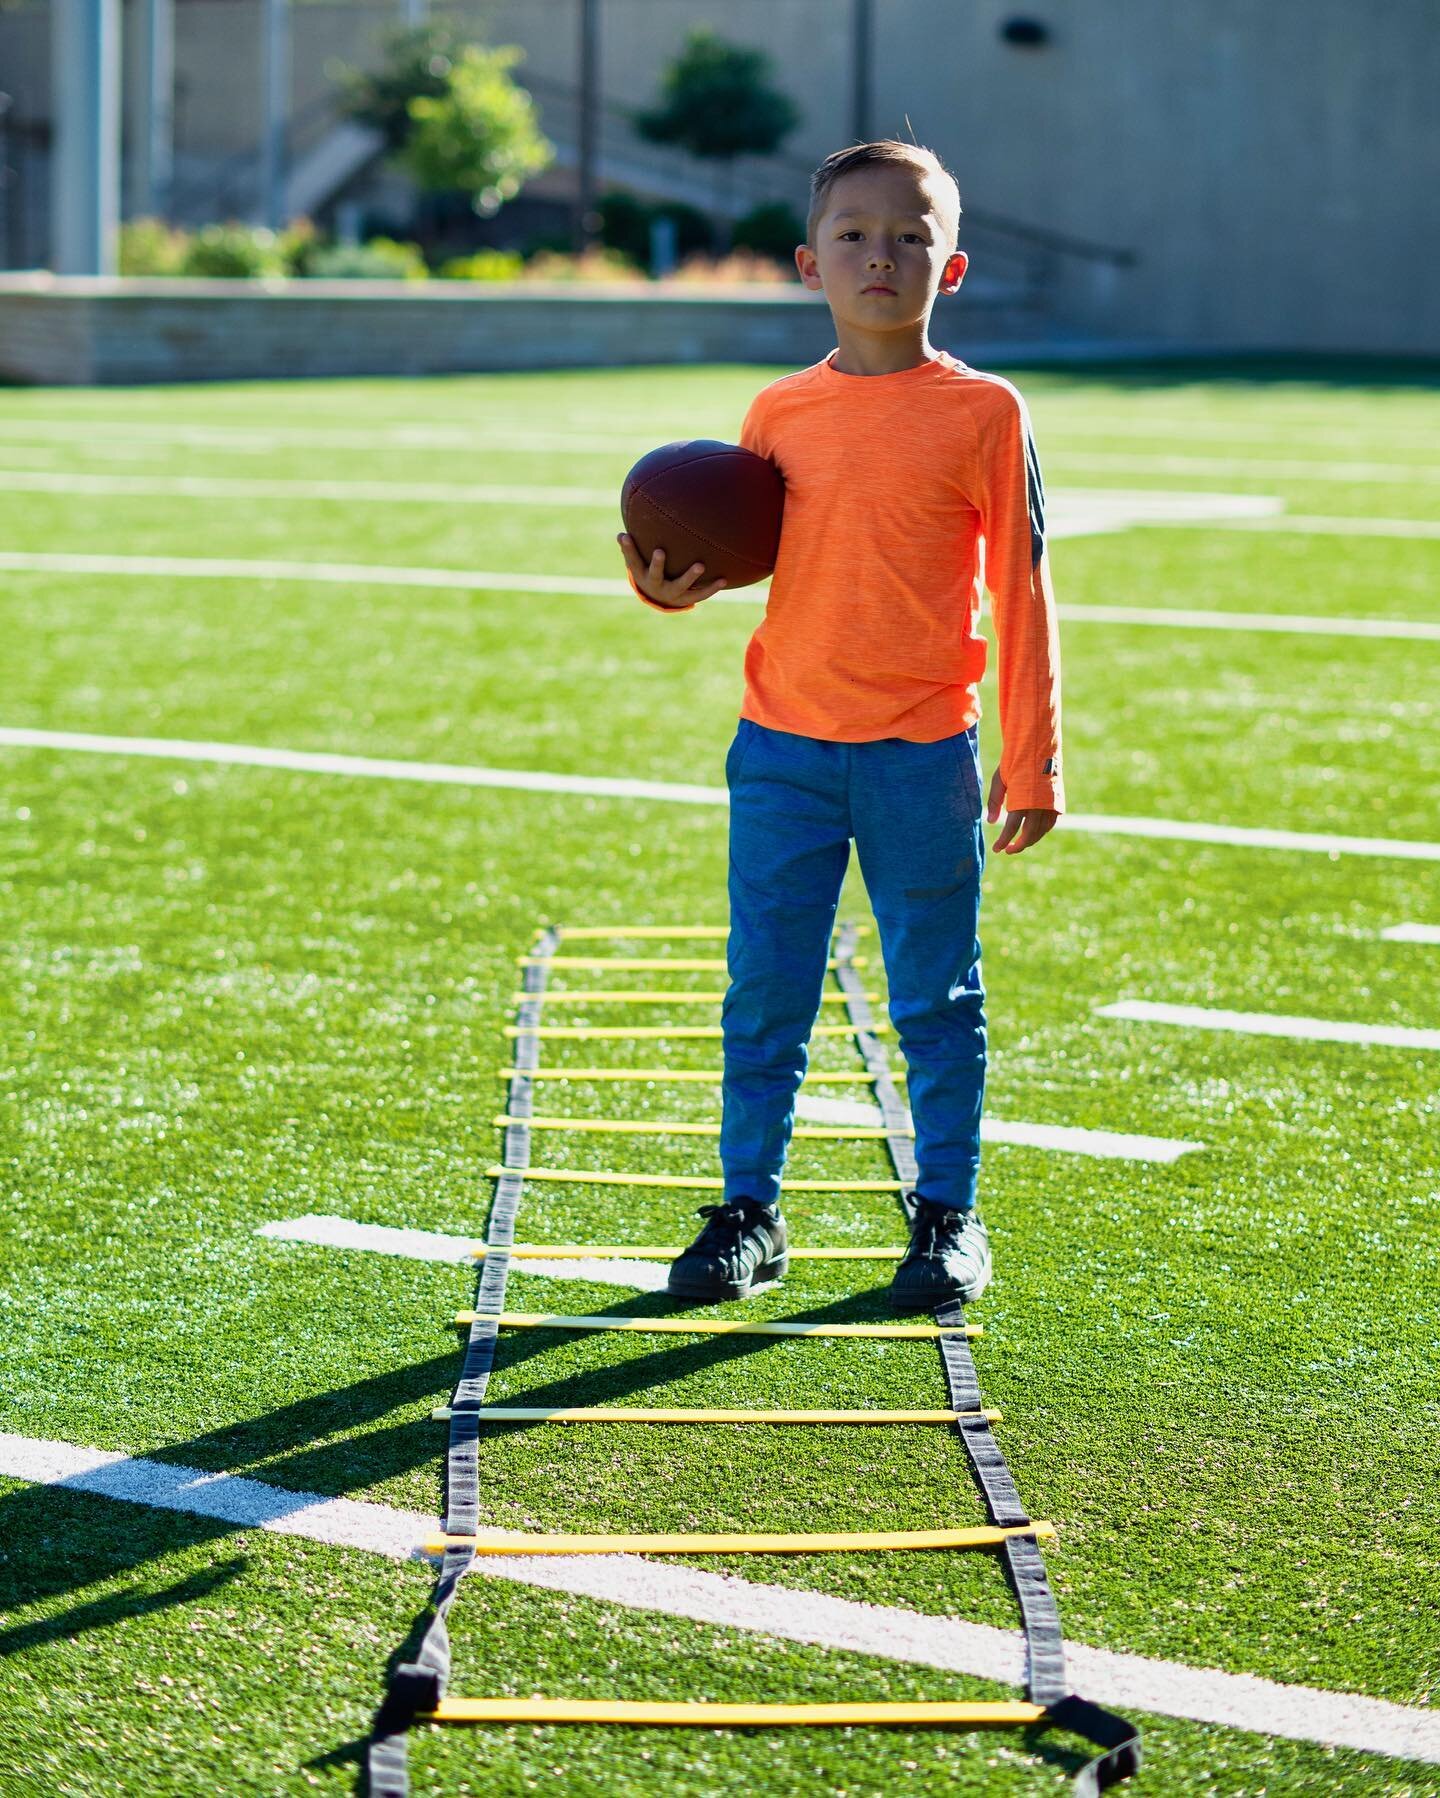 Who&rsquo;s ready for some football 🏈 #walmartpartner⁣
⁣
One thing I tell my boys is to be prepared. @walmart helps with that. Gearing out the boys for fall football from apparel to practice gear. #walmart has everything I need and at everyday low p